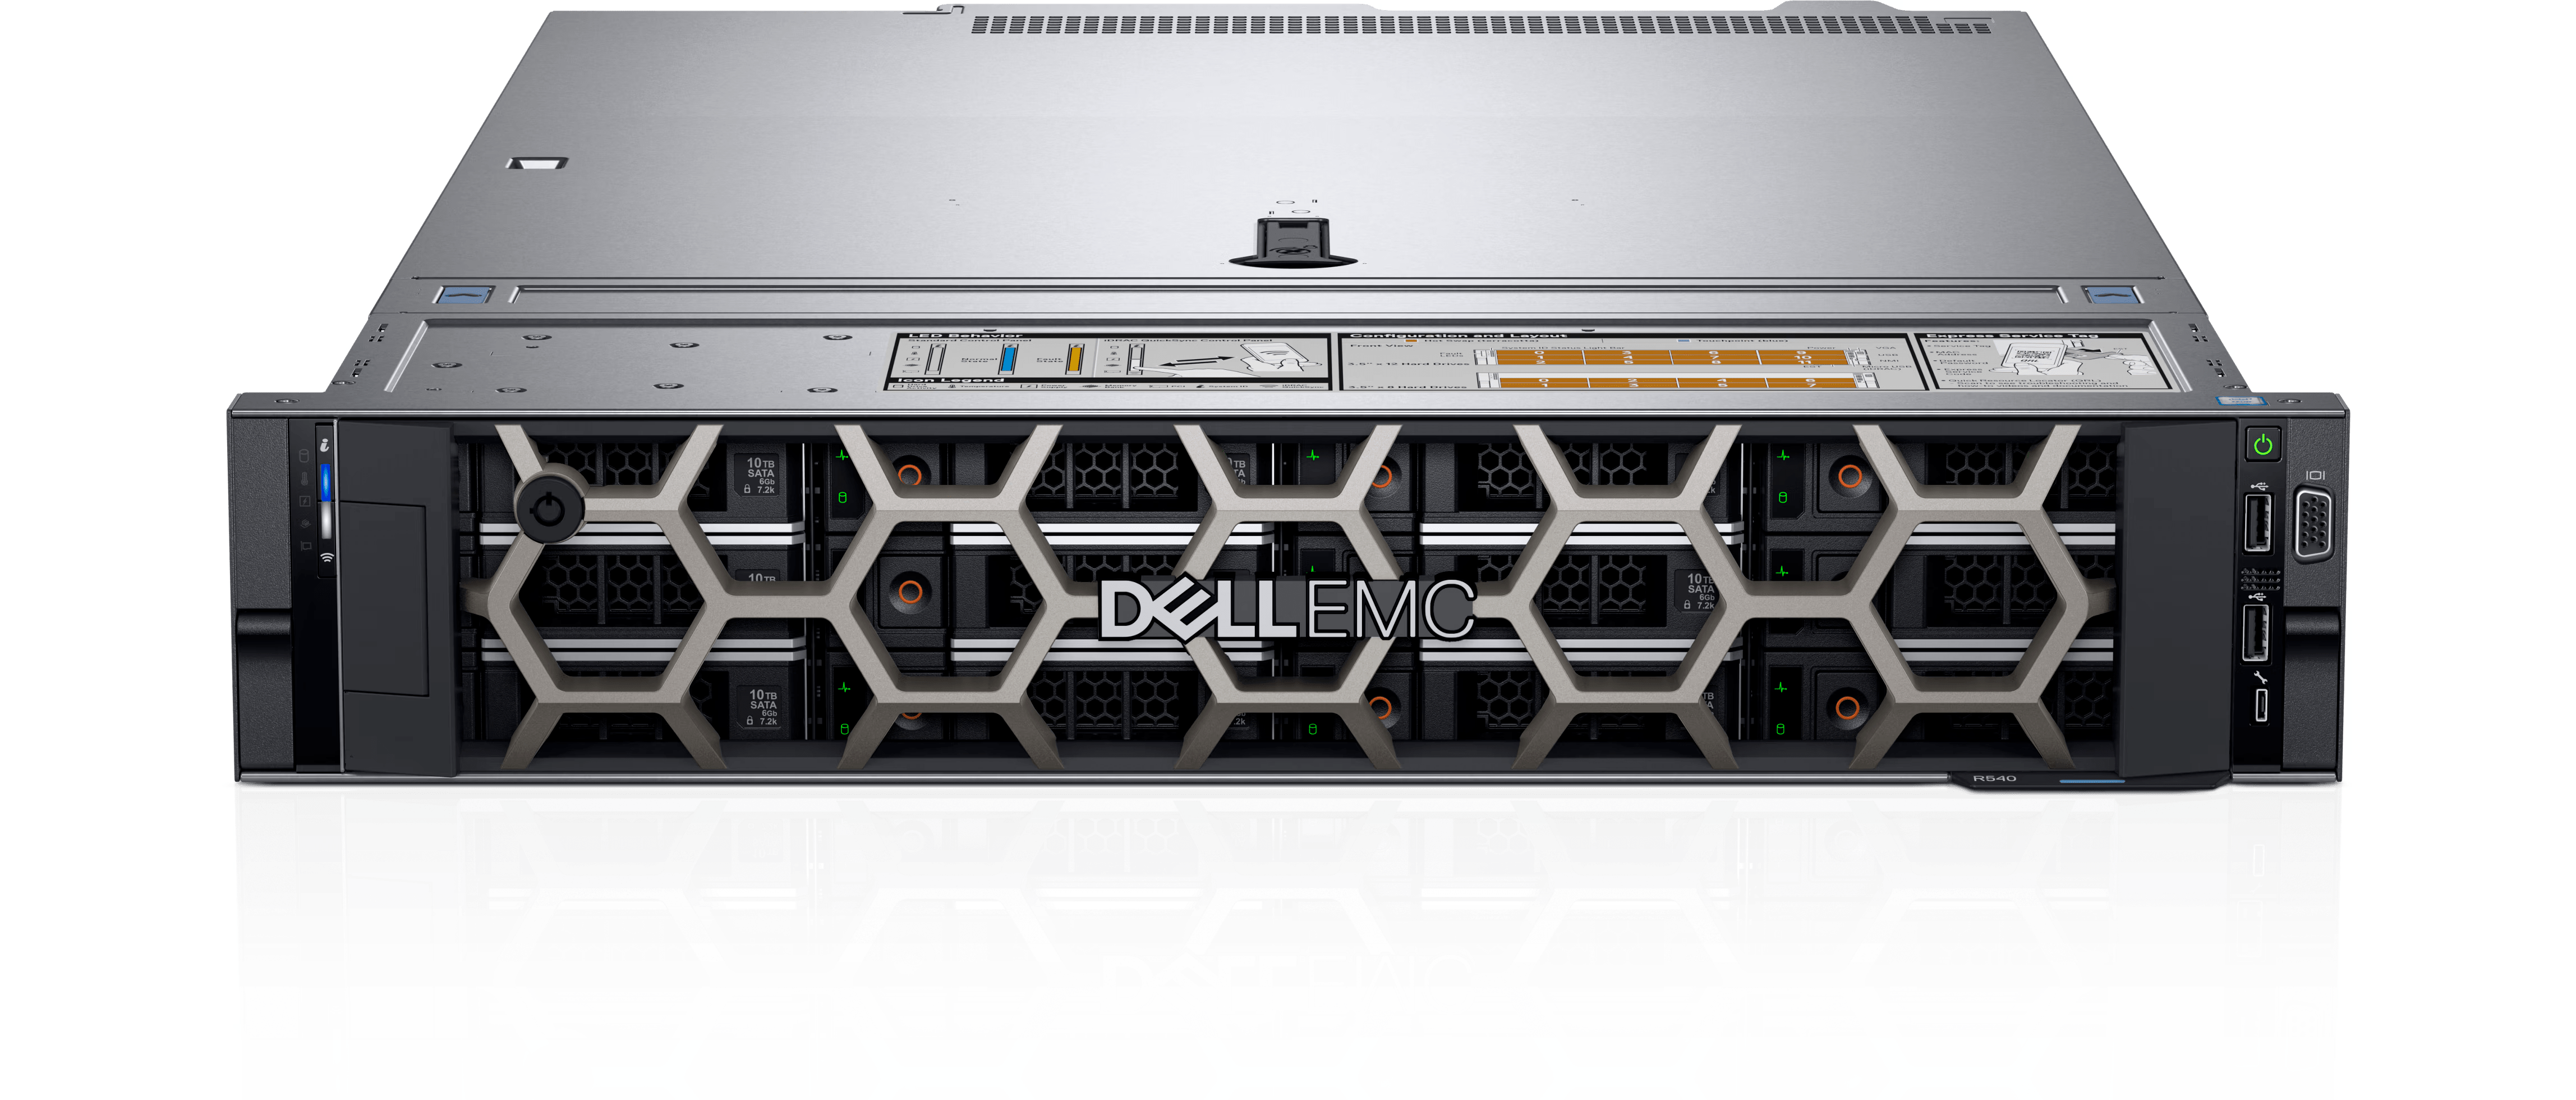 DELL SERVER POWER EDGE R540 3.5" CHASSIS WITH UPTO 8 3.5"/2.5" HDD'S/SSD'S 2U - Golchha Computers